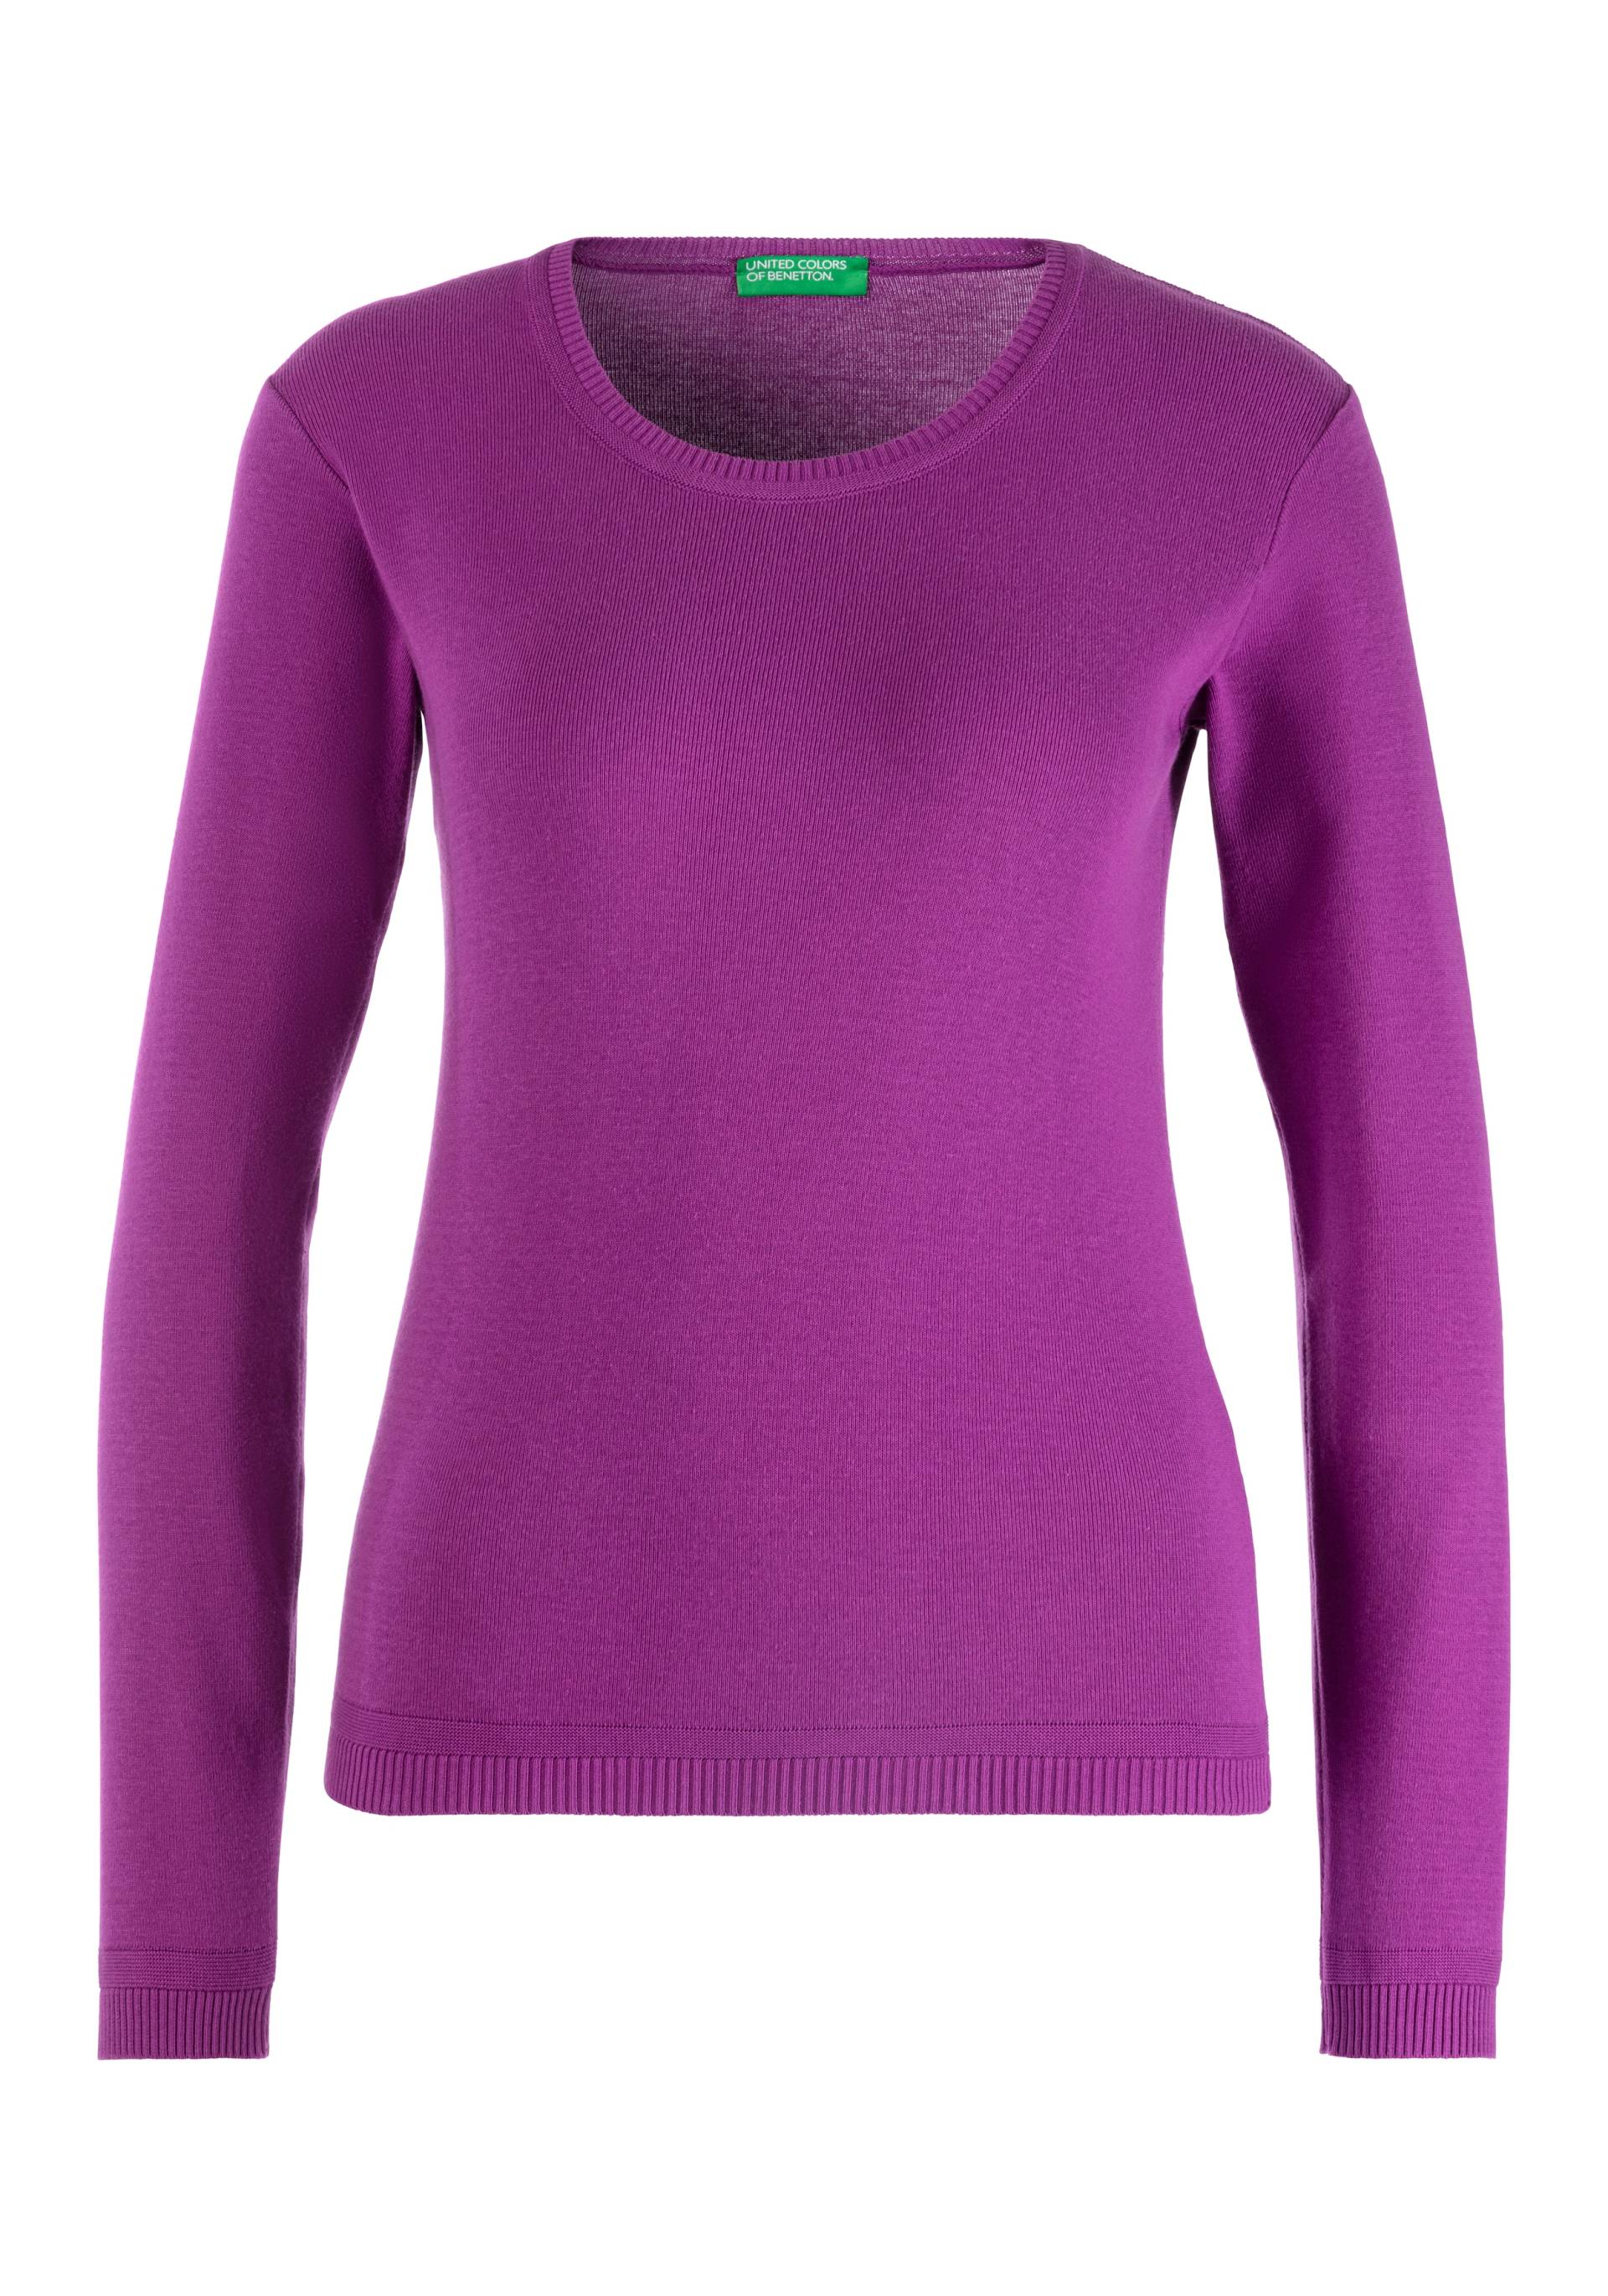 United Colors of Benetton Strickpullover, mit Markenlabel von United Colors of Benetton